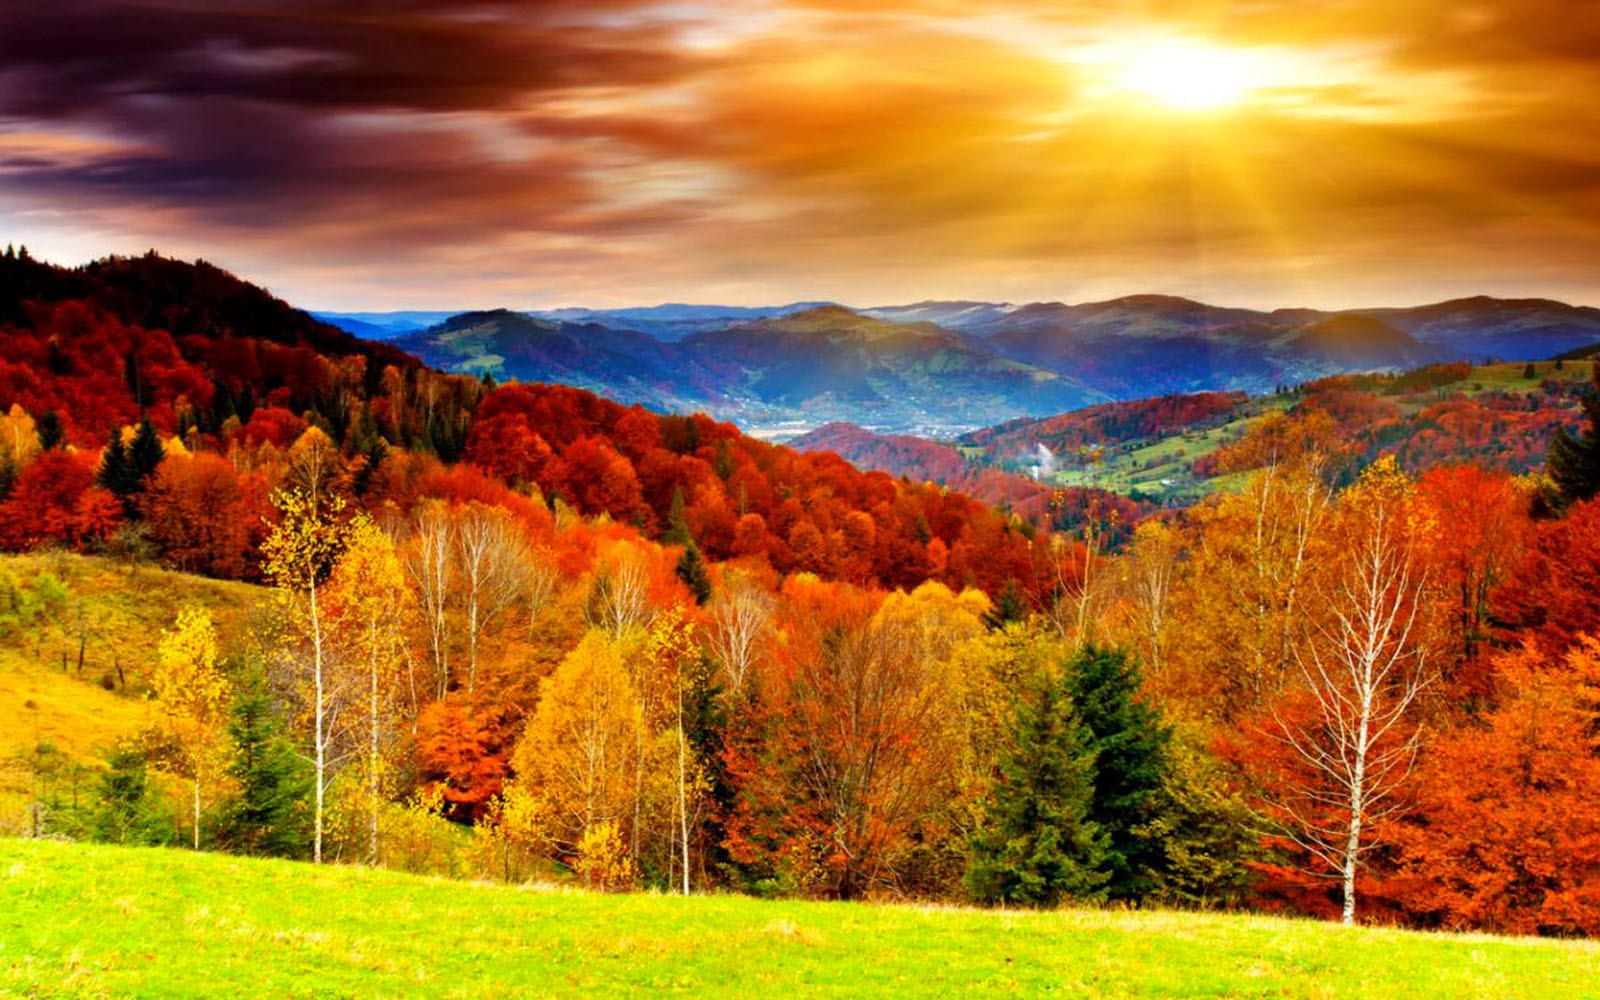 Tag Autumn Scenery Wallpapers BackgroundsPhotos Images and